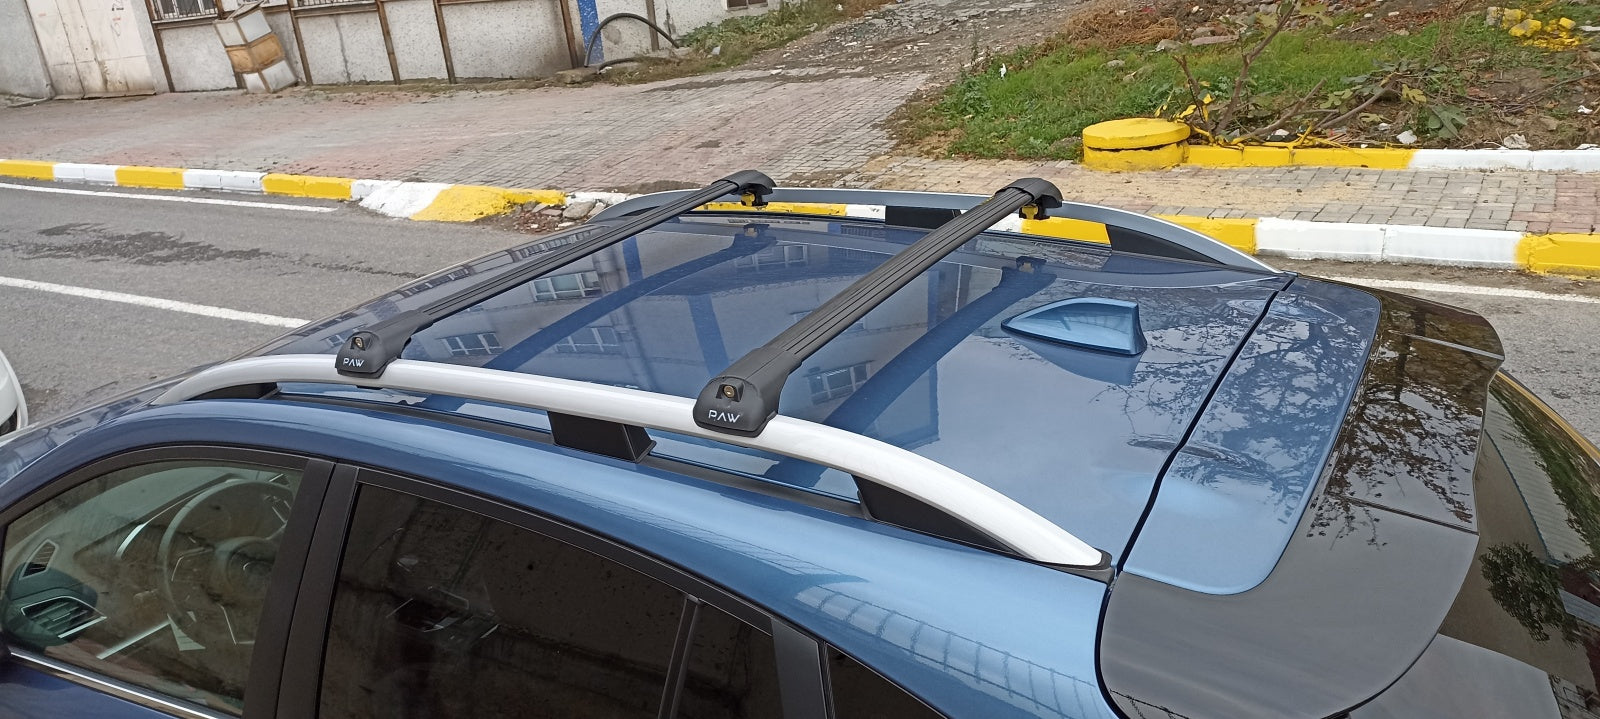 For Mitsubishi Montero 2001-2006 Roof Rack System Carrier Cross Bars Aluminum Lockable High Quality of Metal Bracket Black-6